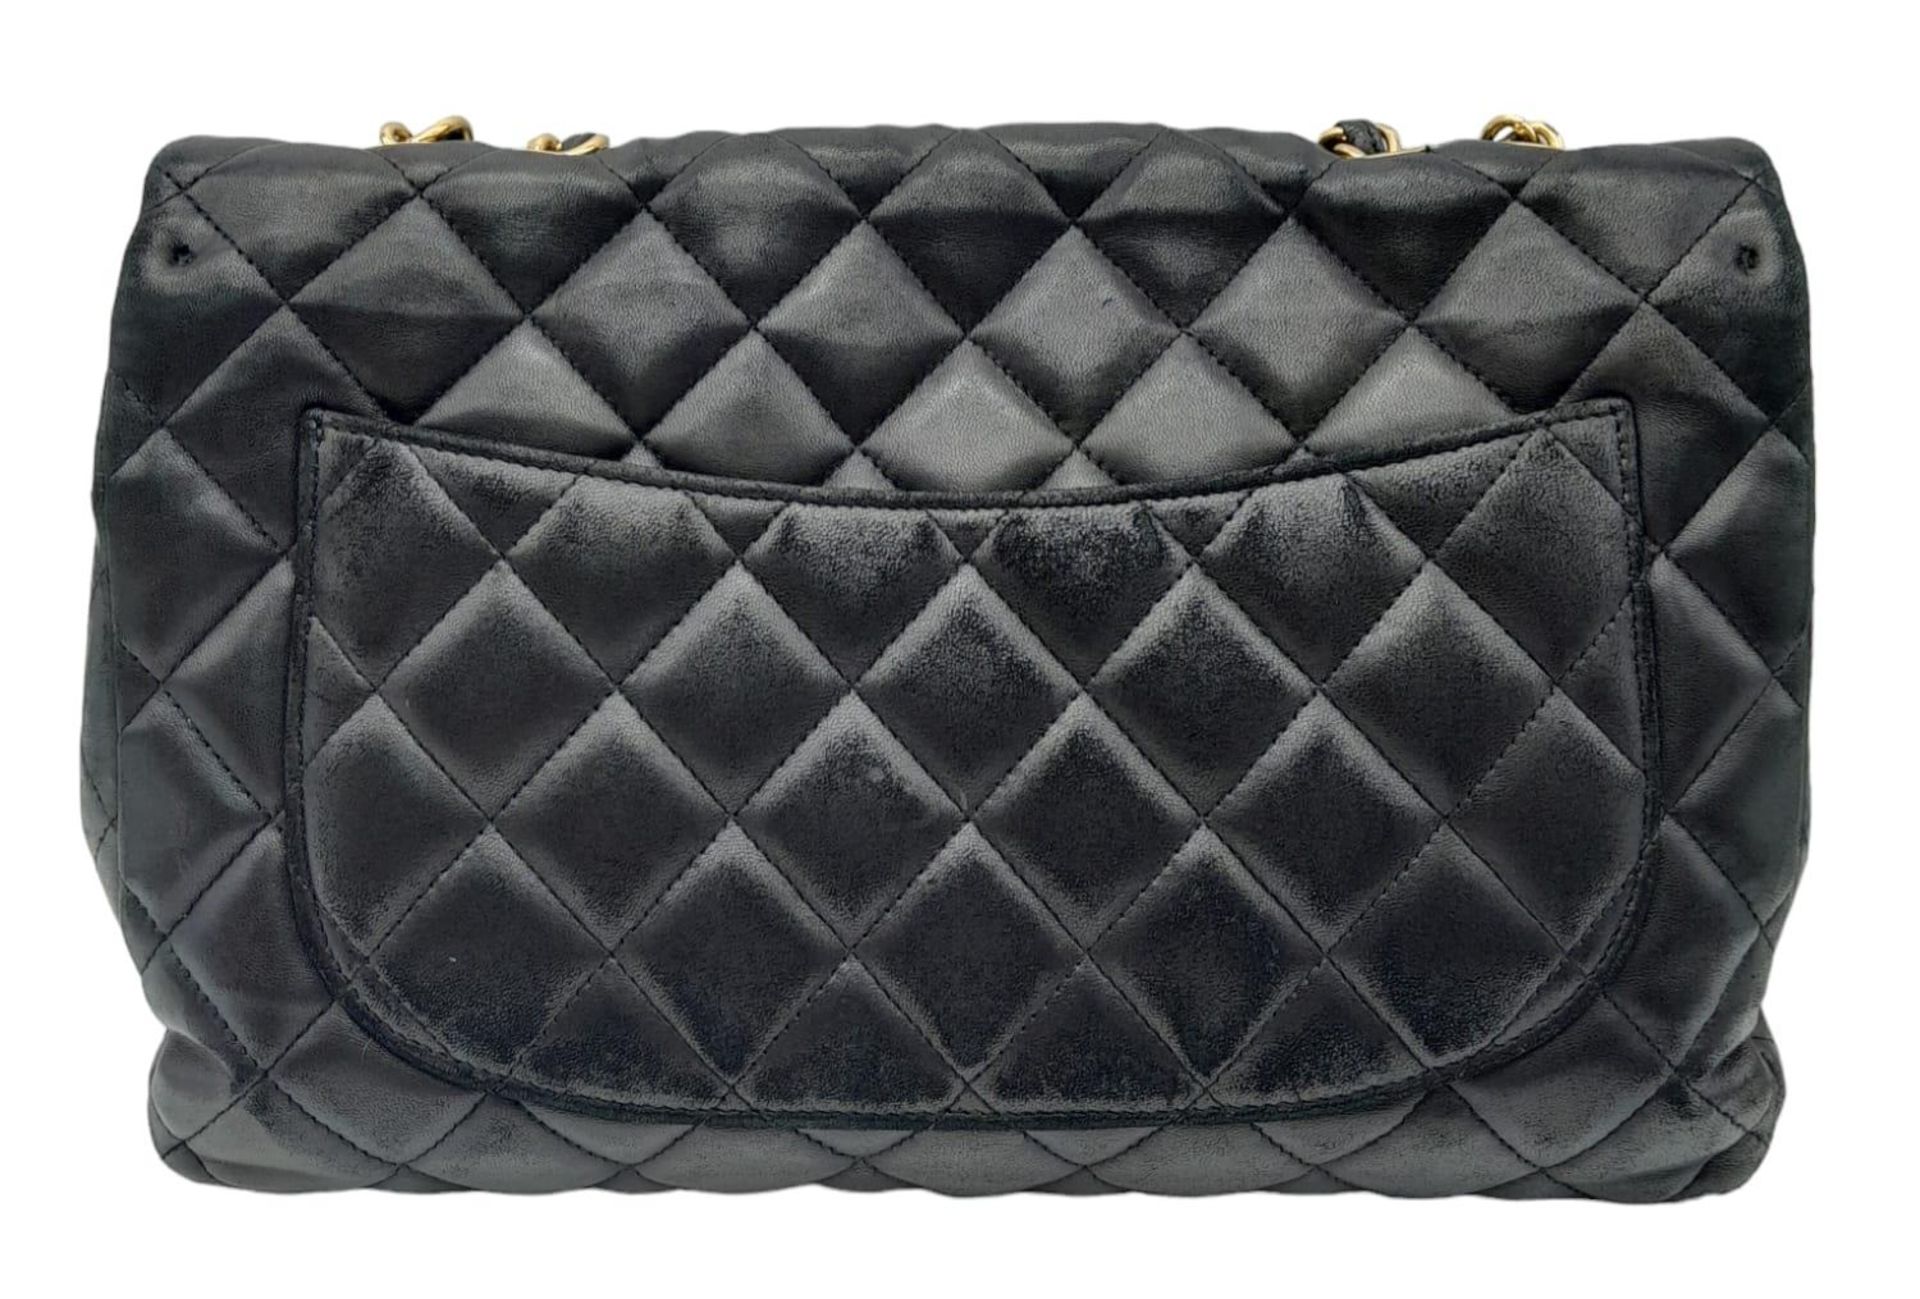 A Chanel Black Caviar Classic Single Flap Bag. Quilted pebbled leather exterior with gold-toned - Bild 6 aus 19